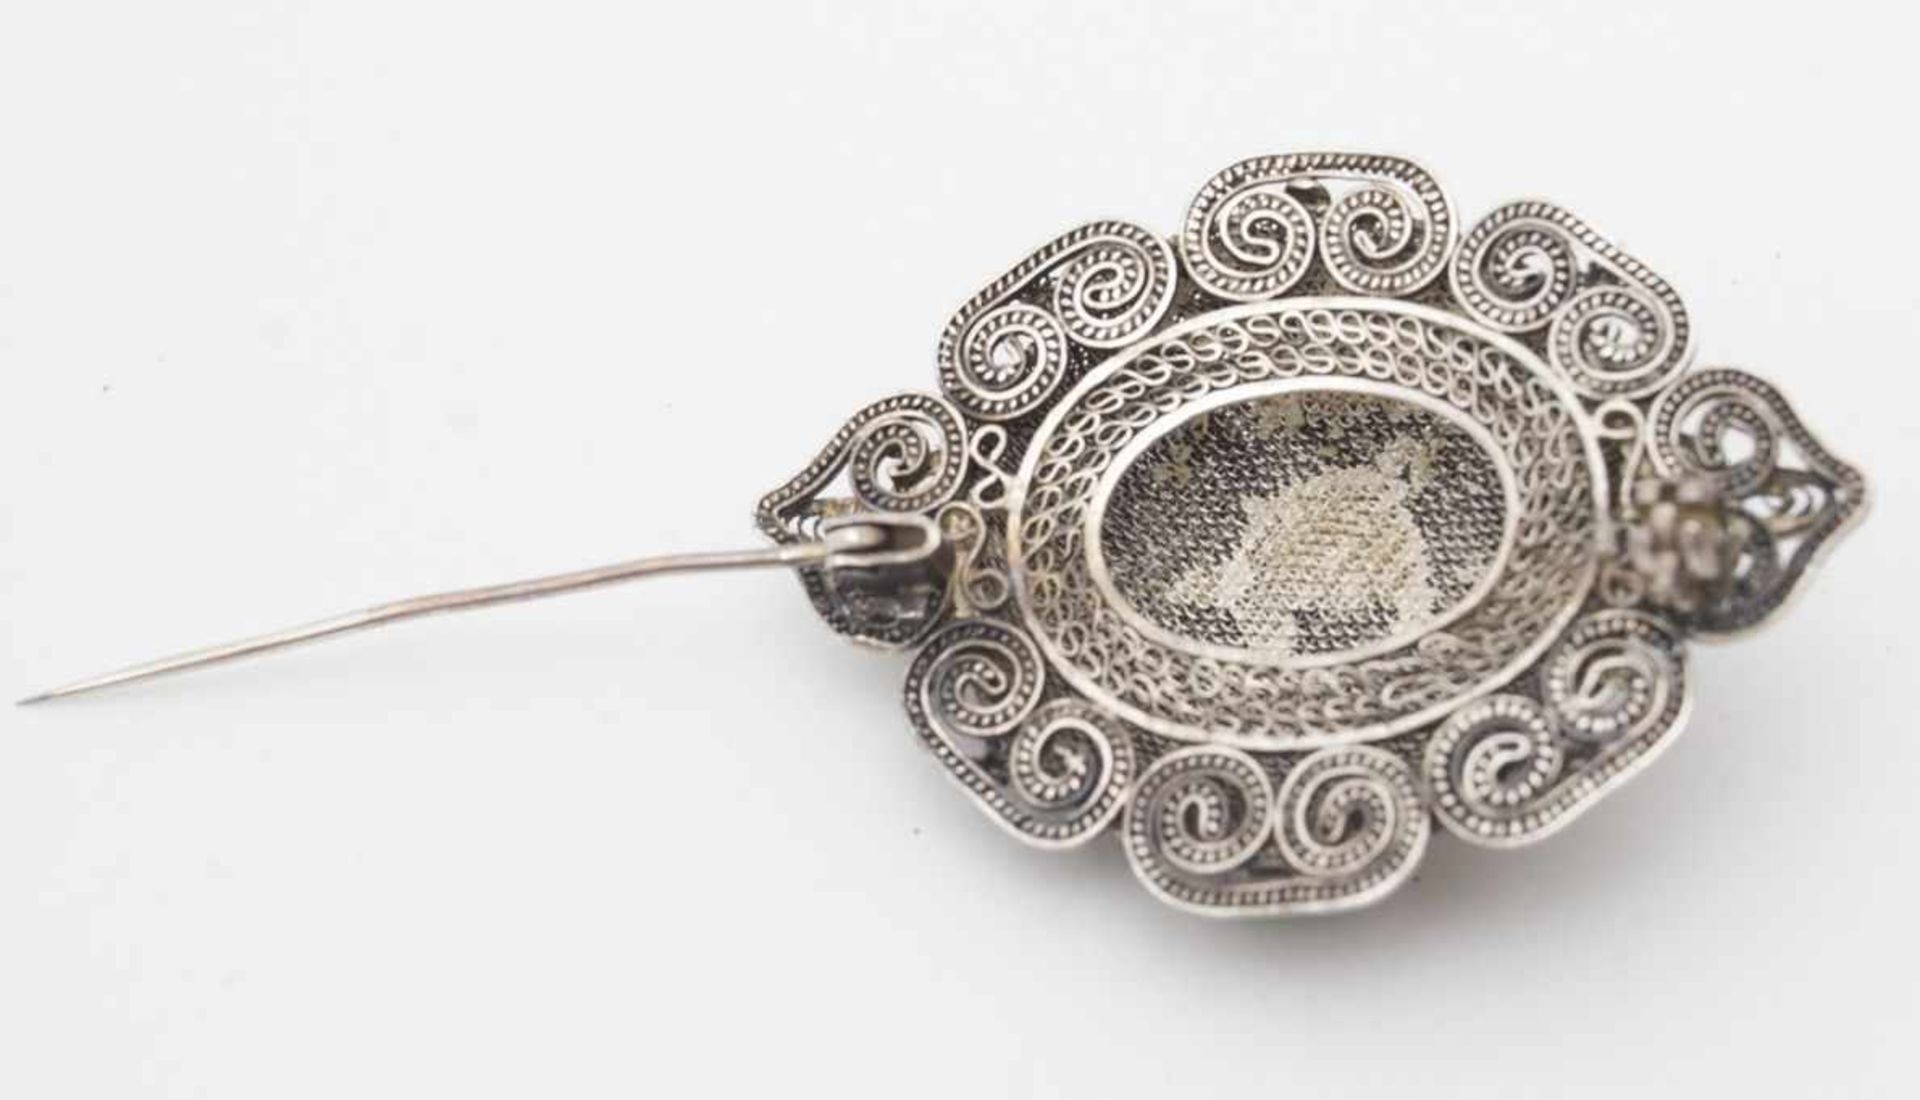 Brooch - China, 20th century Silver filigree with floral pattern, set with 5 cabochons, probably - Bild 2 aus 2